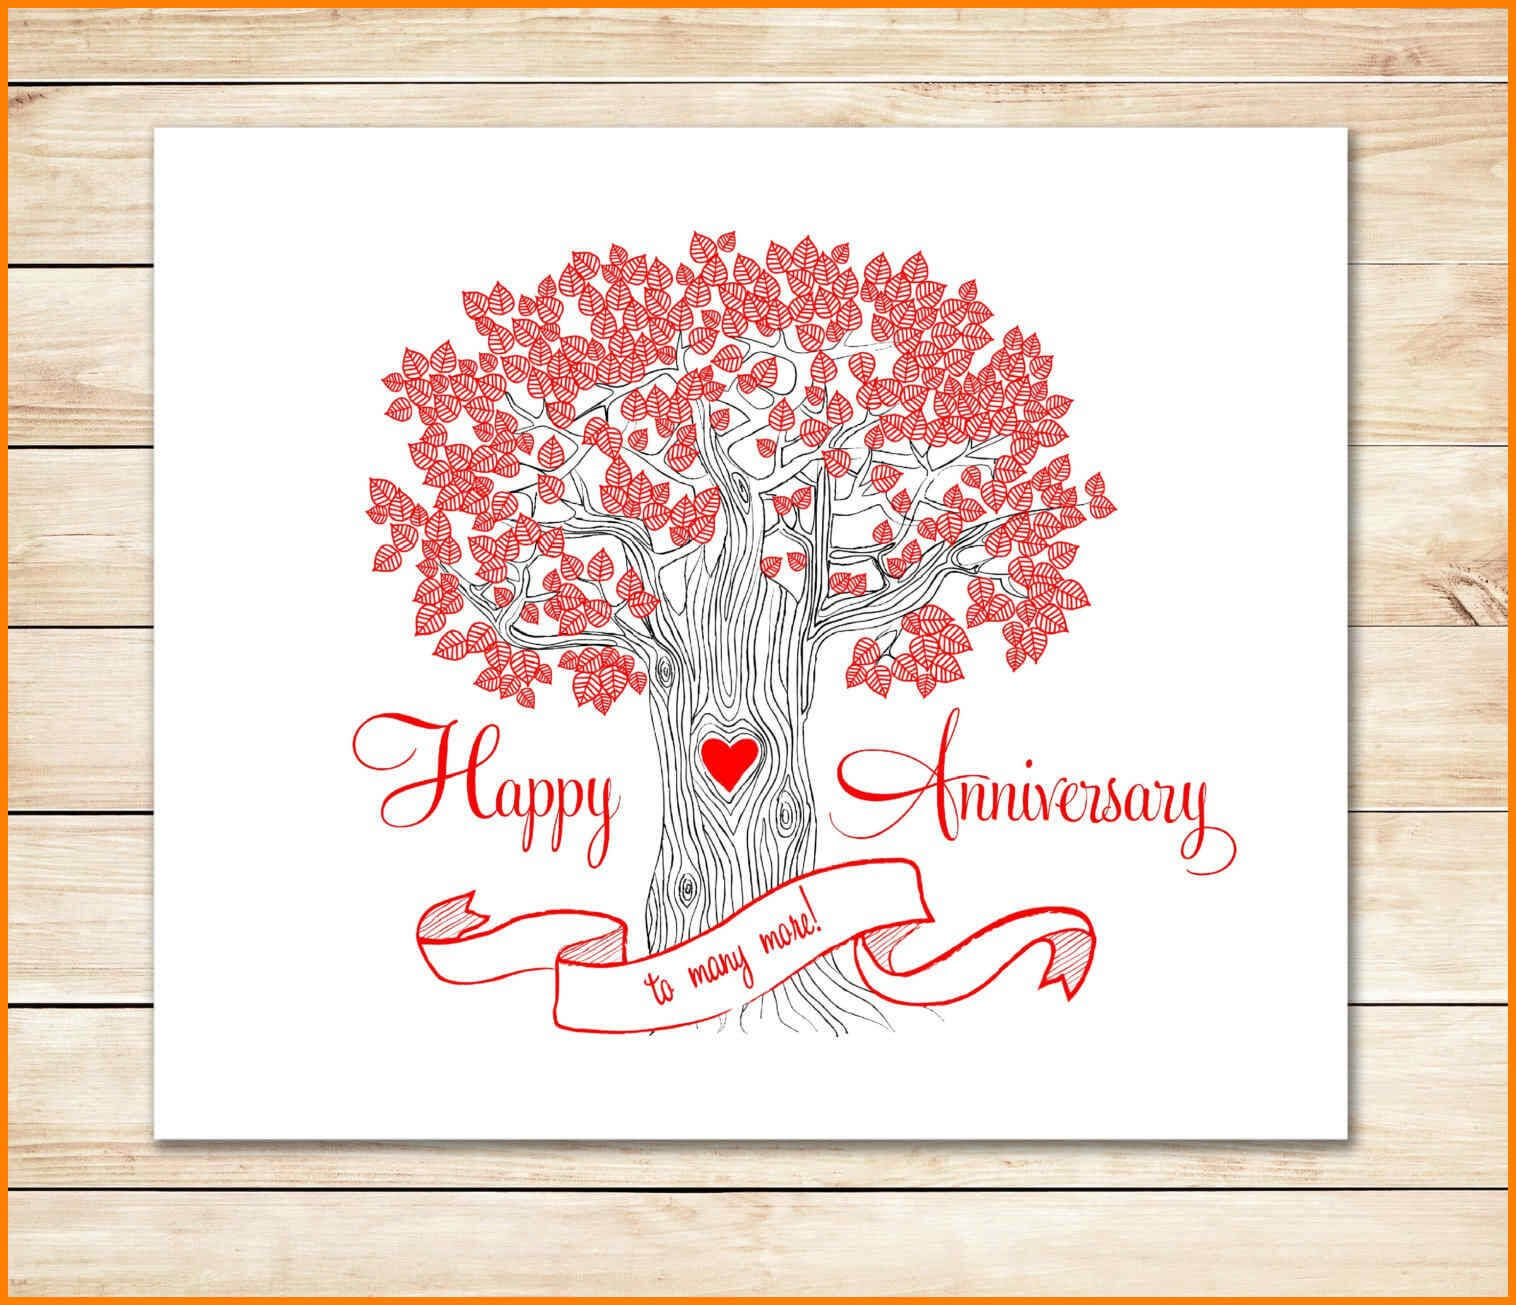 8+ Happy Anniversary Templates Free | Plastic Mouldings With Template For Anniversary Card